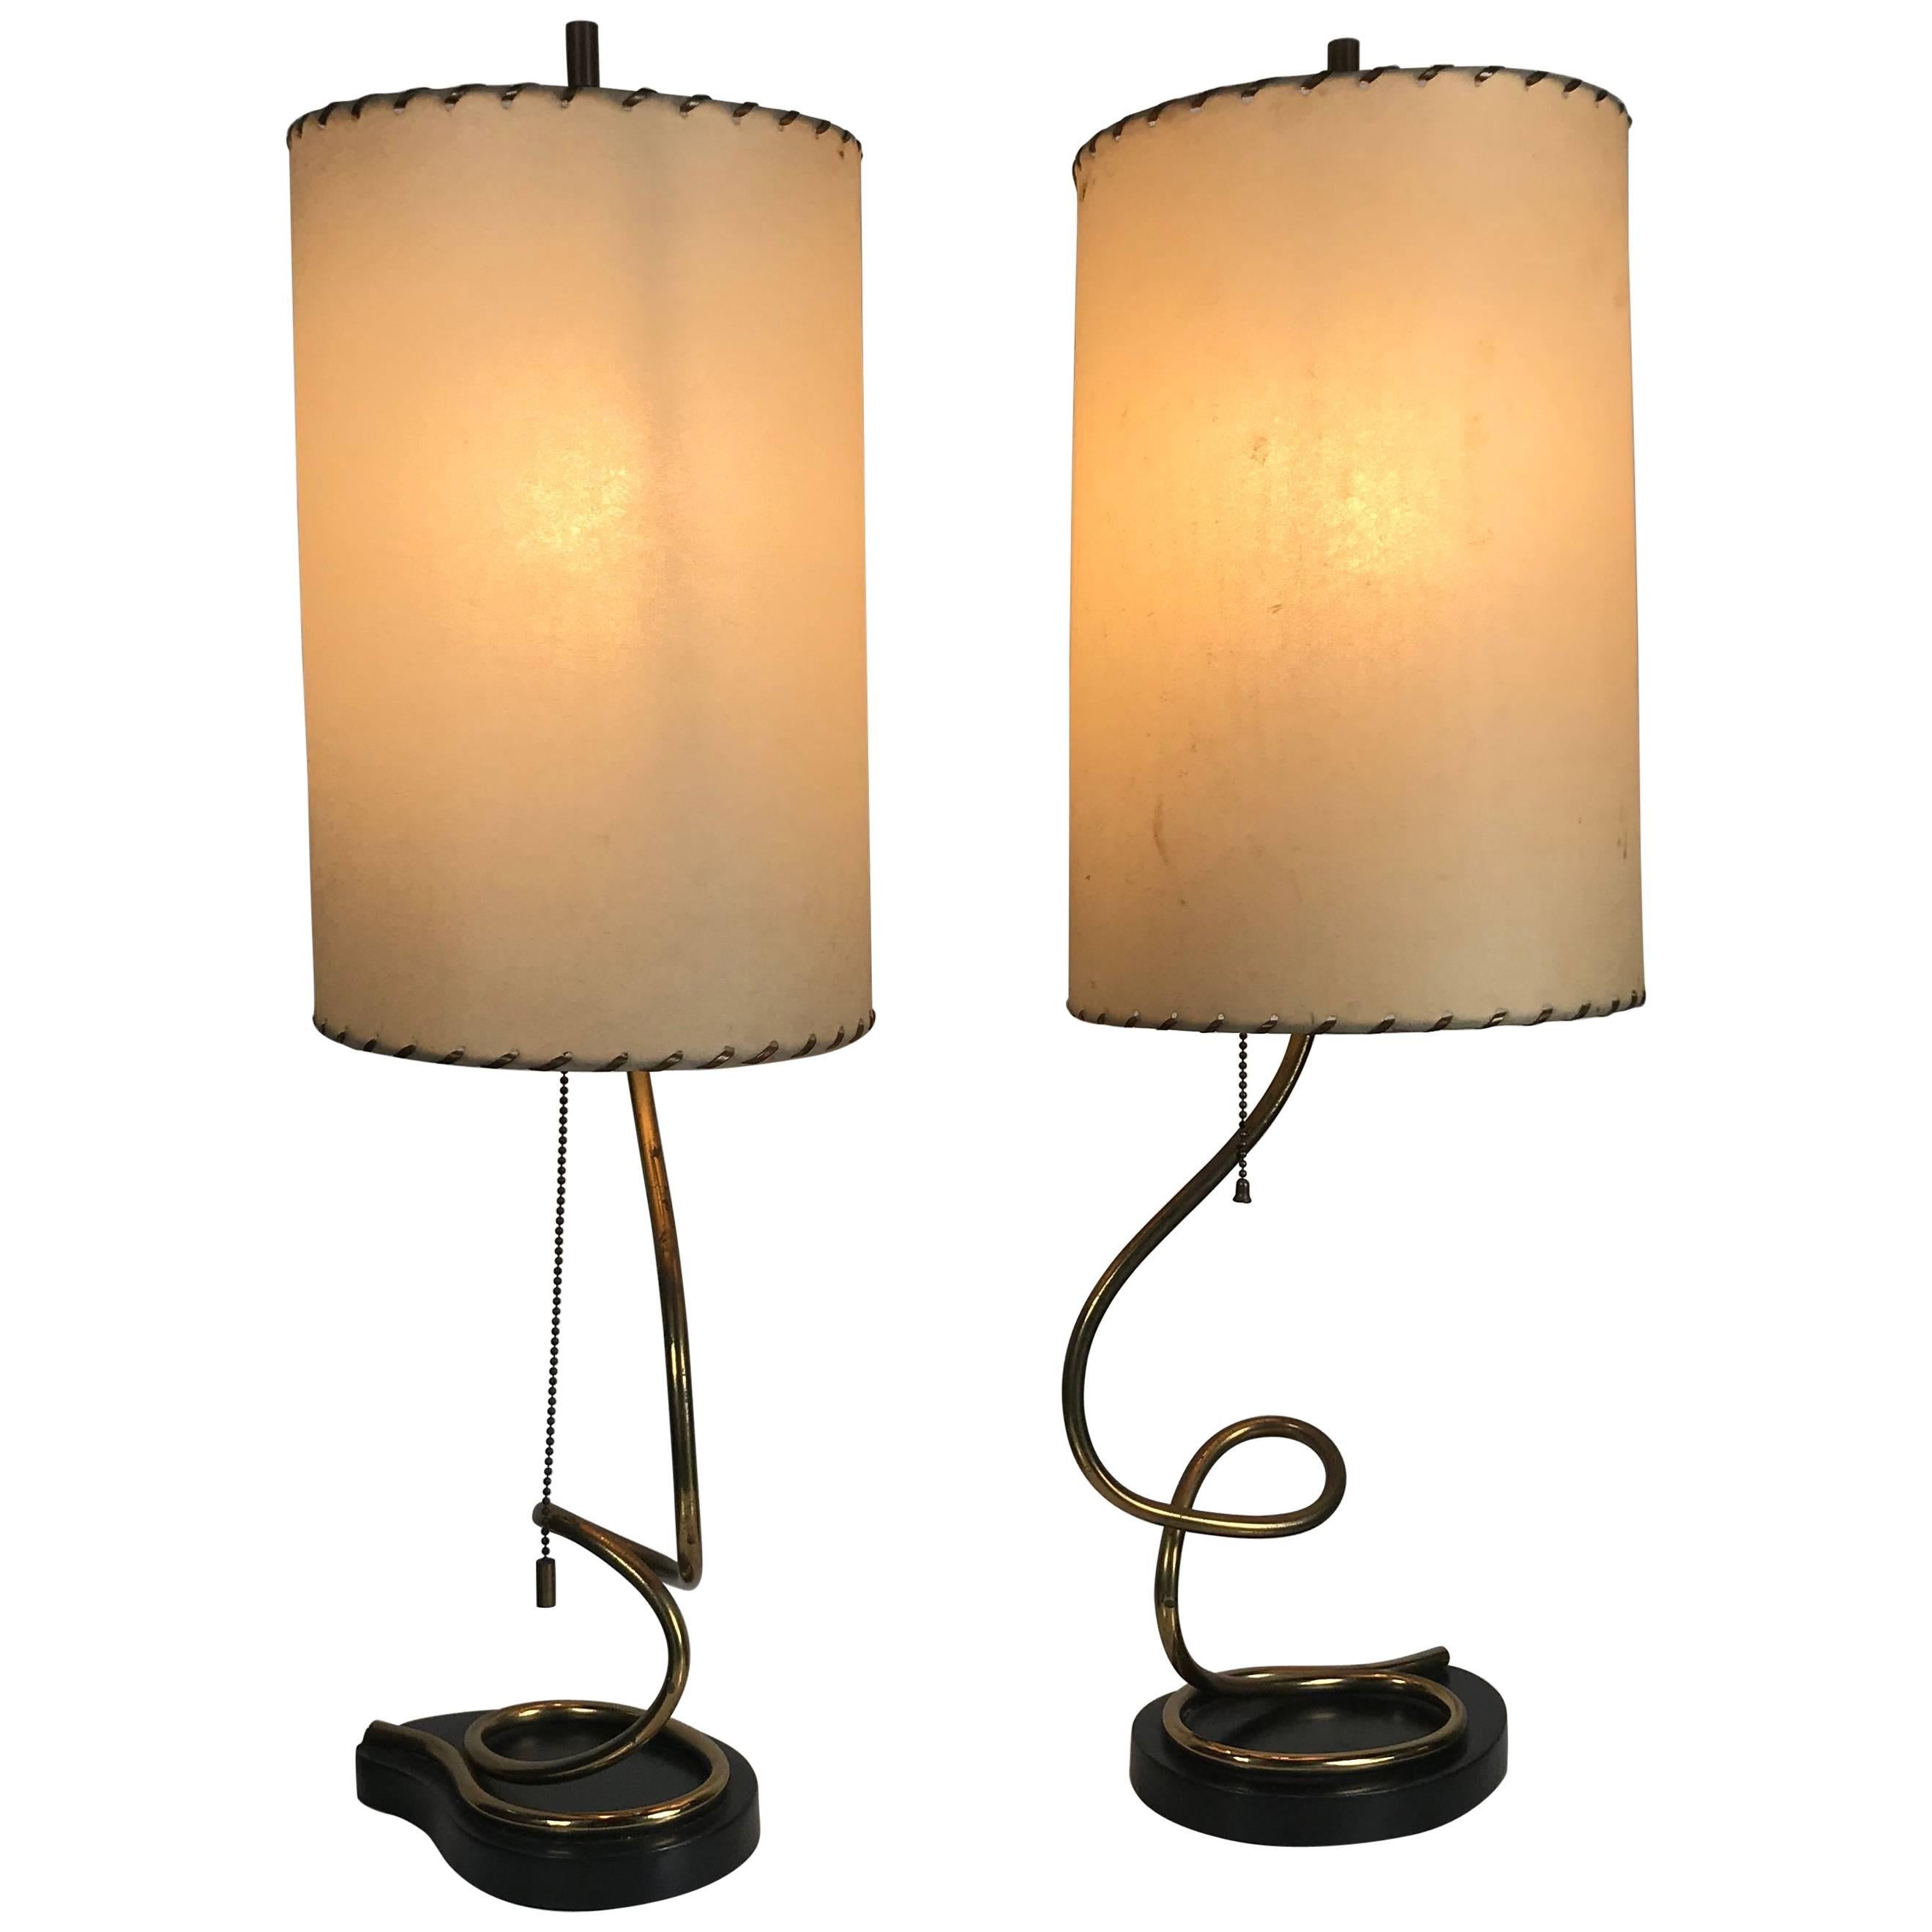 Unusual Pair of Majestic Brass, Metal and Parchment Table Lamps